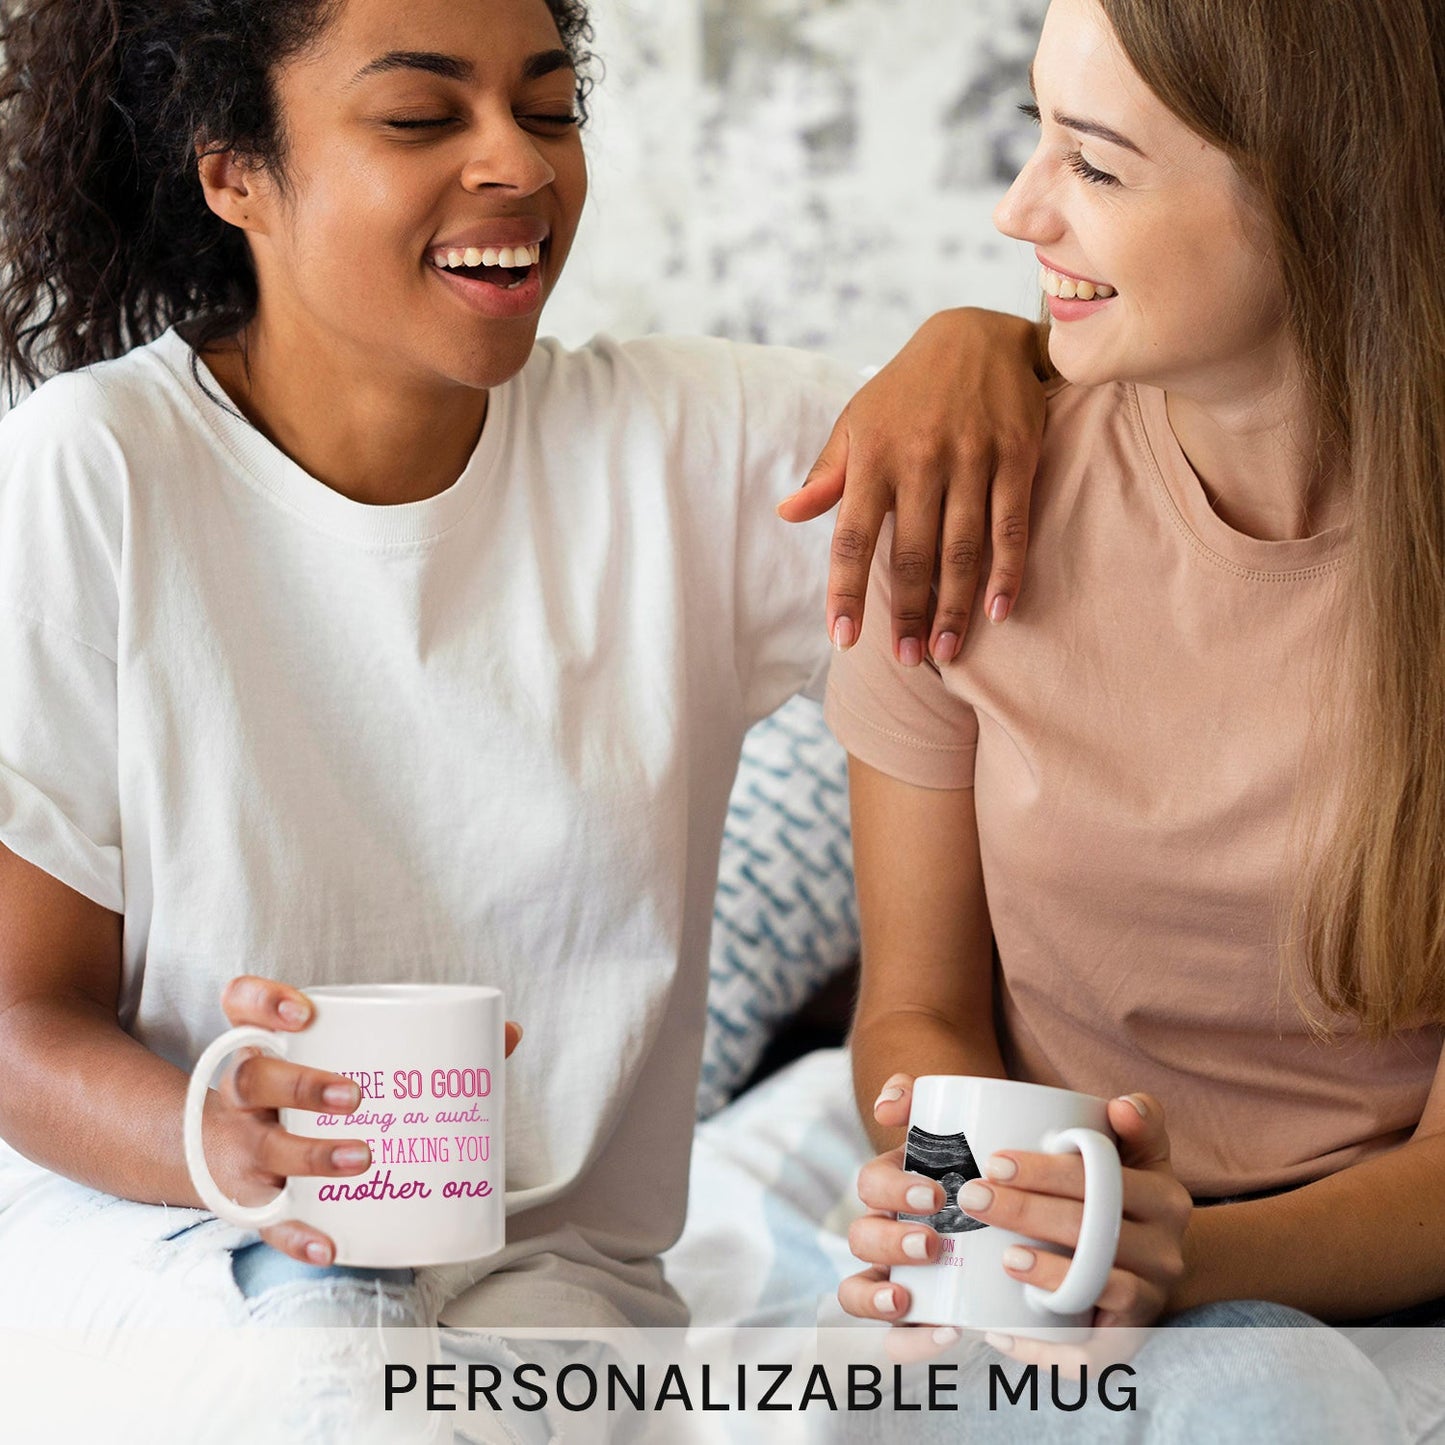 You're So Good At Being An Aunt - Personalized Pregnancy Announcement gift for Aunt - Custom Mug - MyMindfulGifts